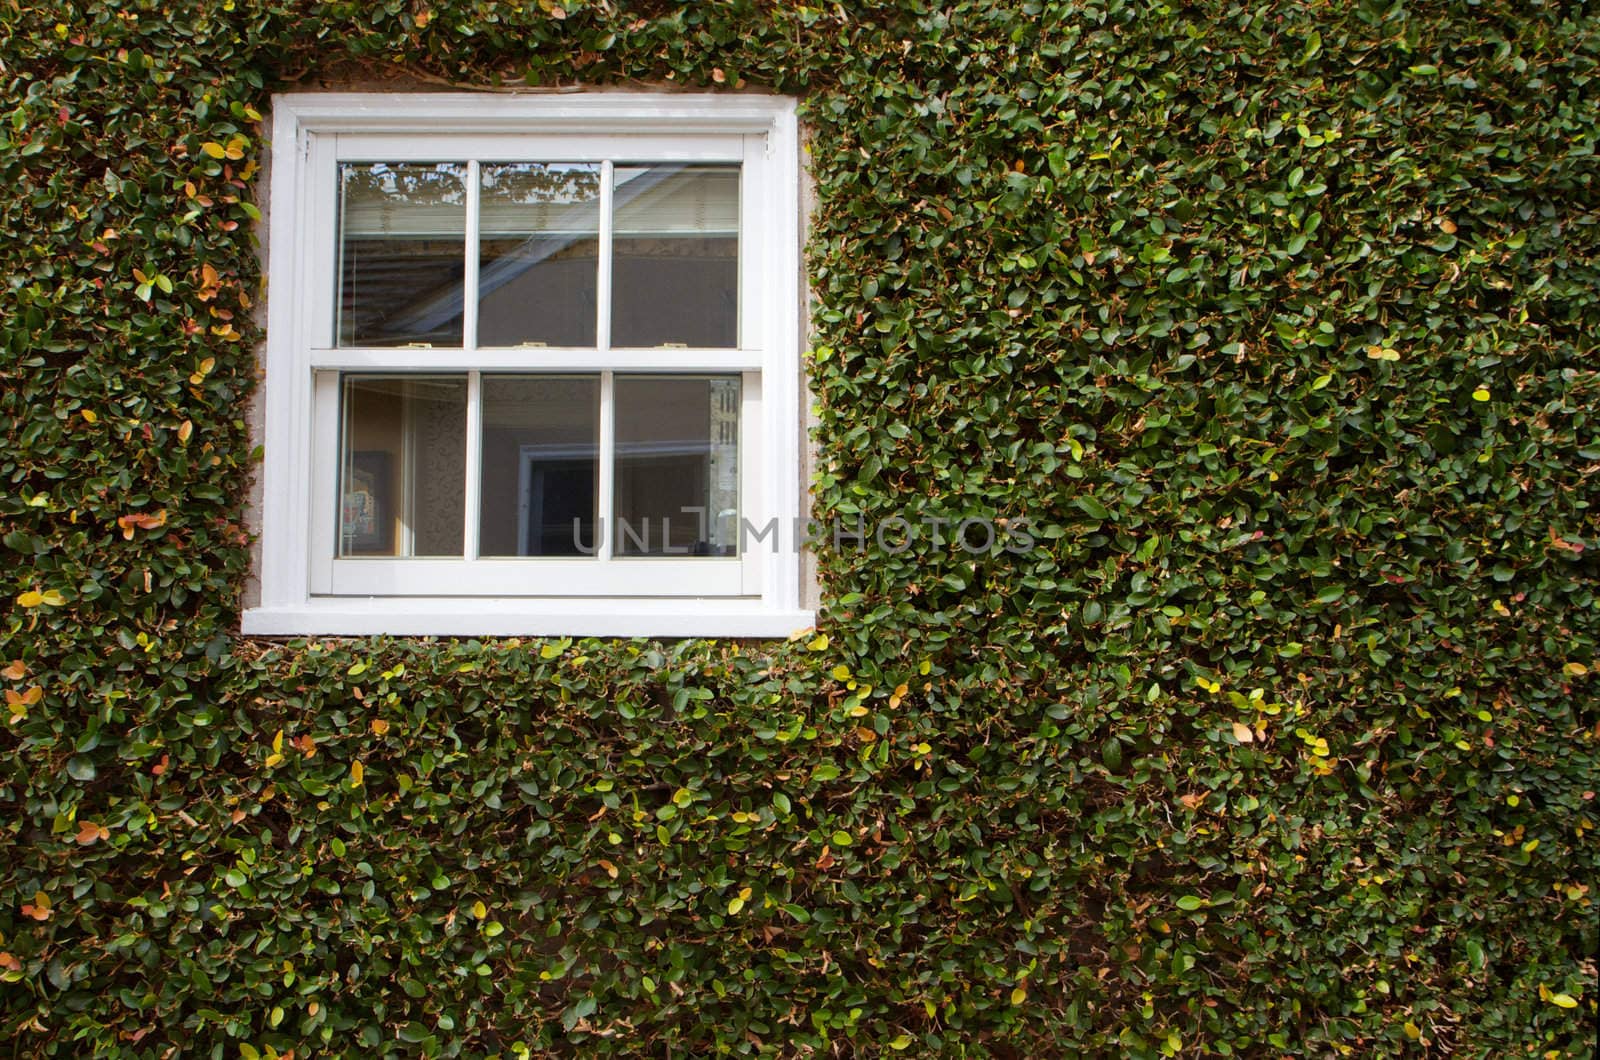 Green ivy covered wall with white window